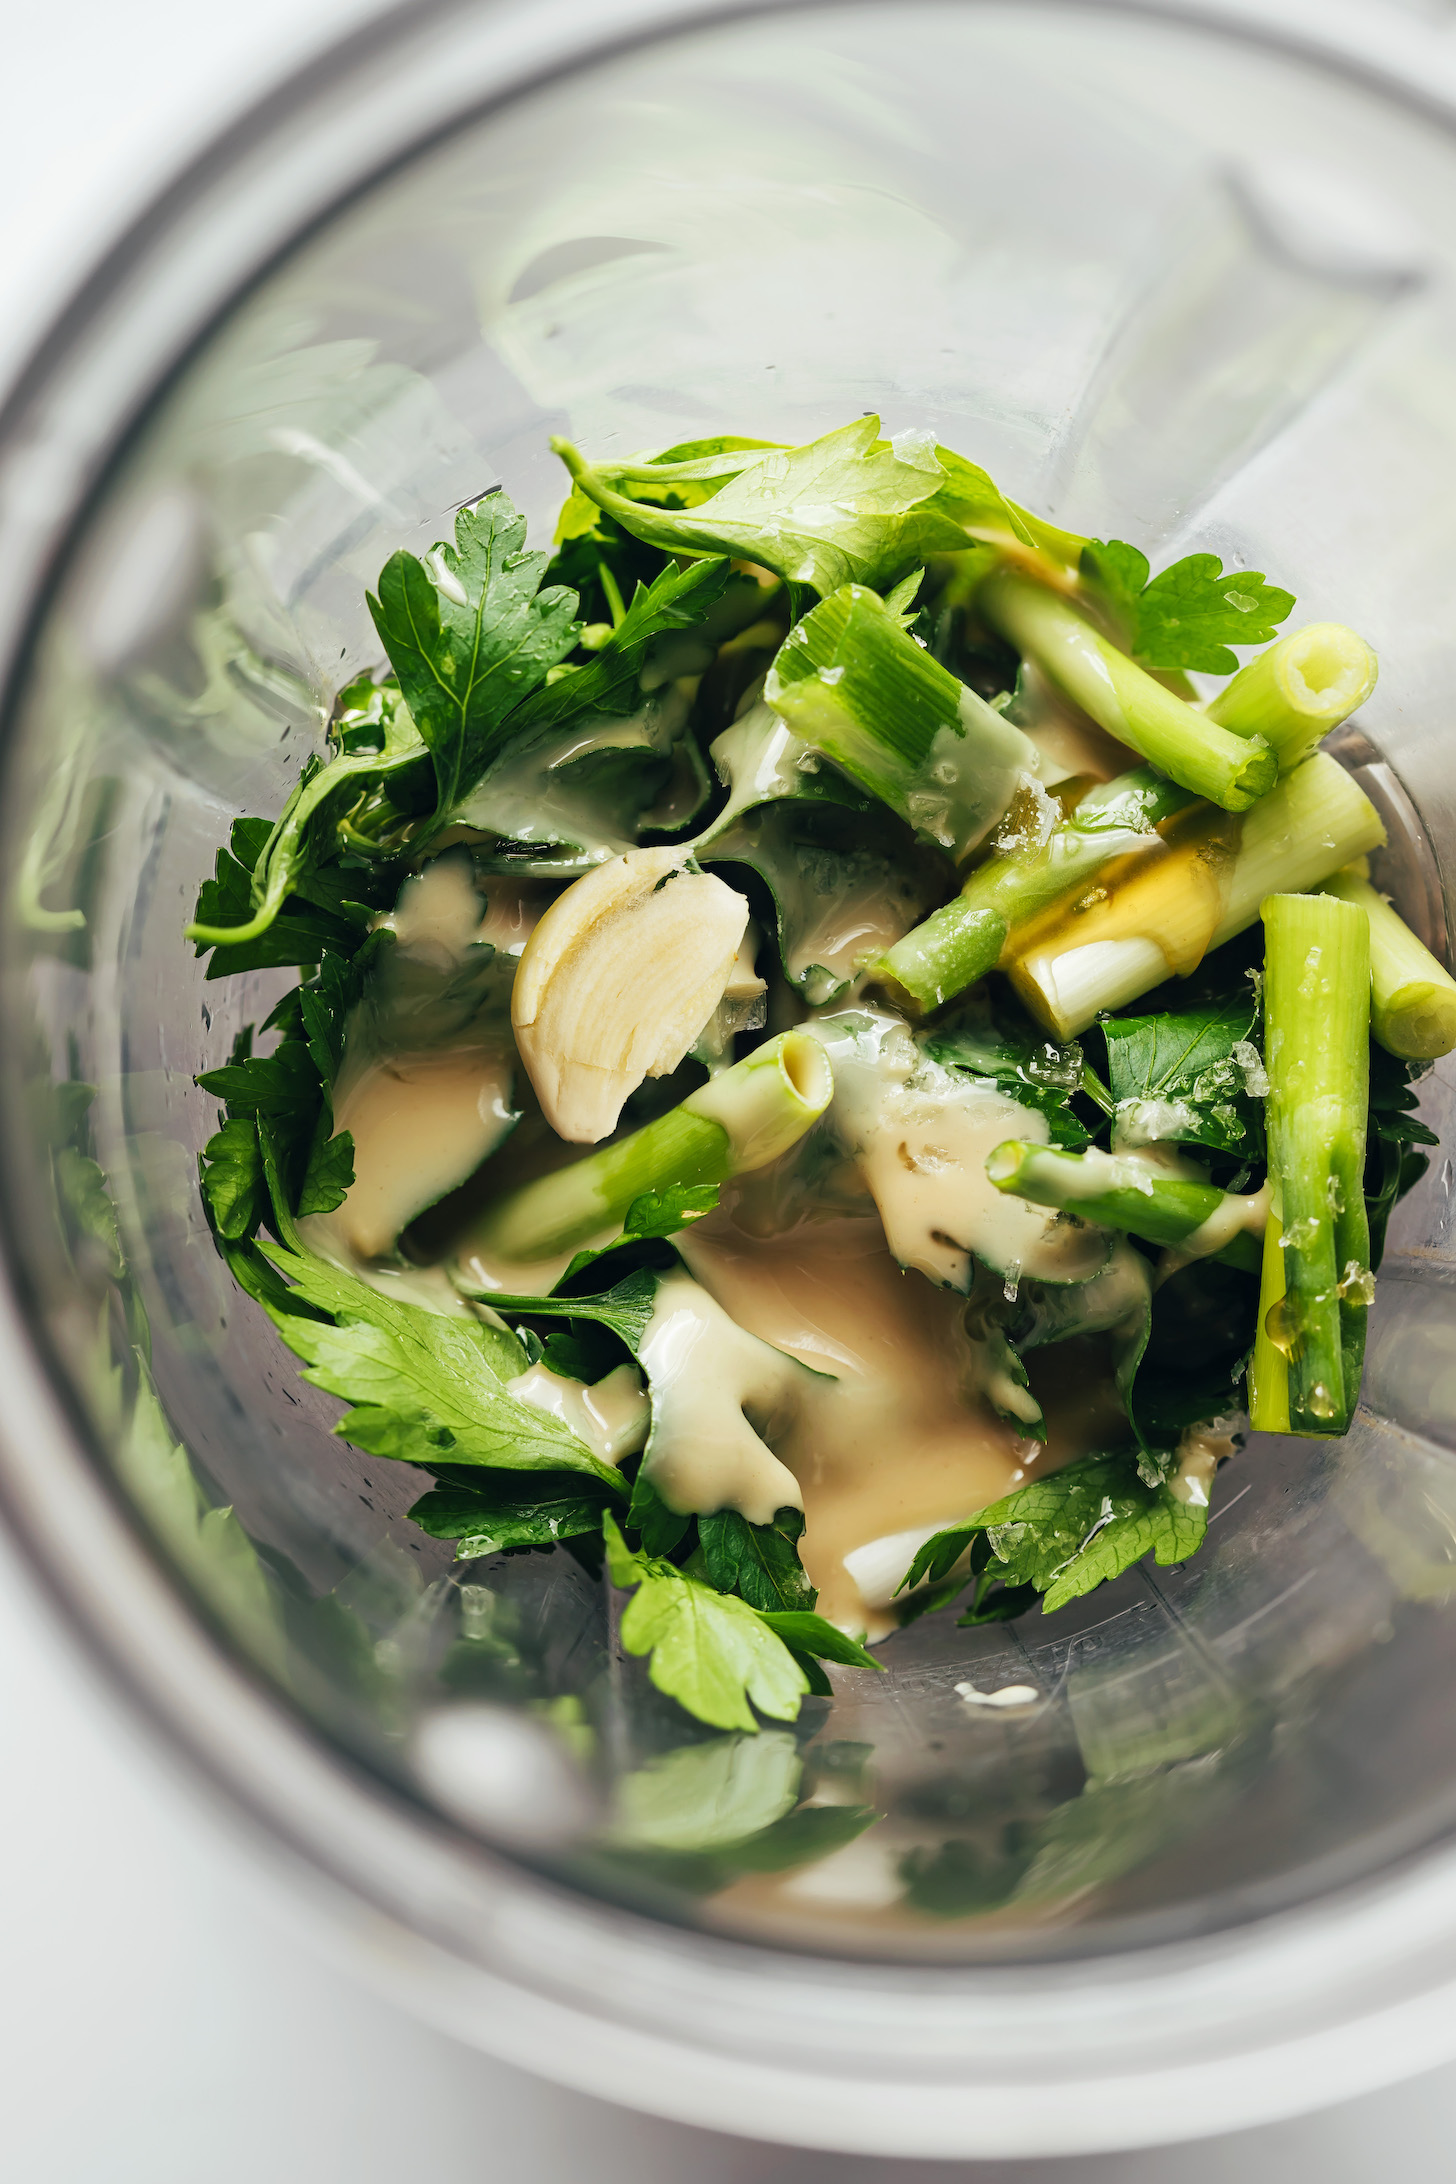 Blender with tahini, green onion, garlic, salt, maple syrup, and other ingredients